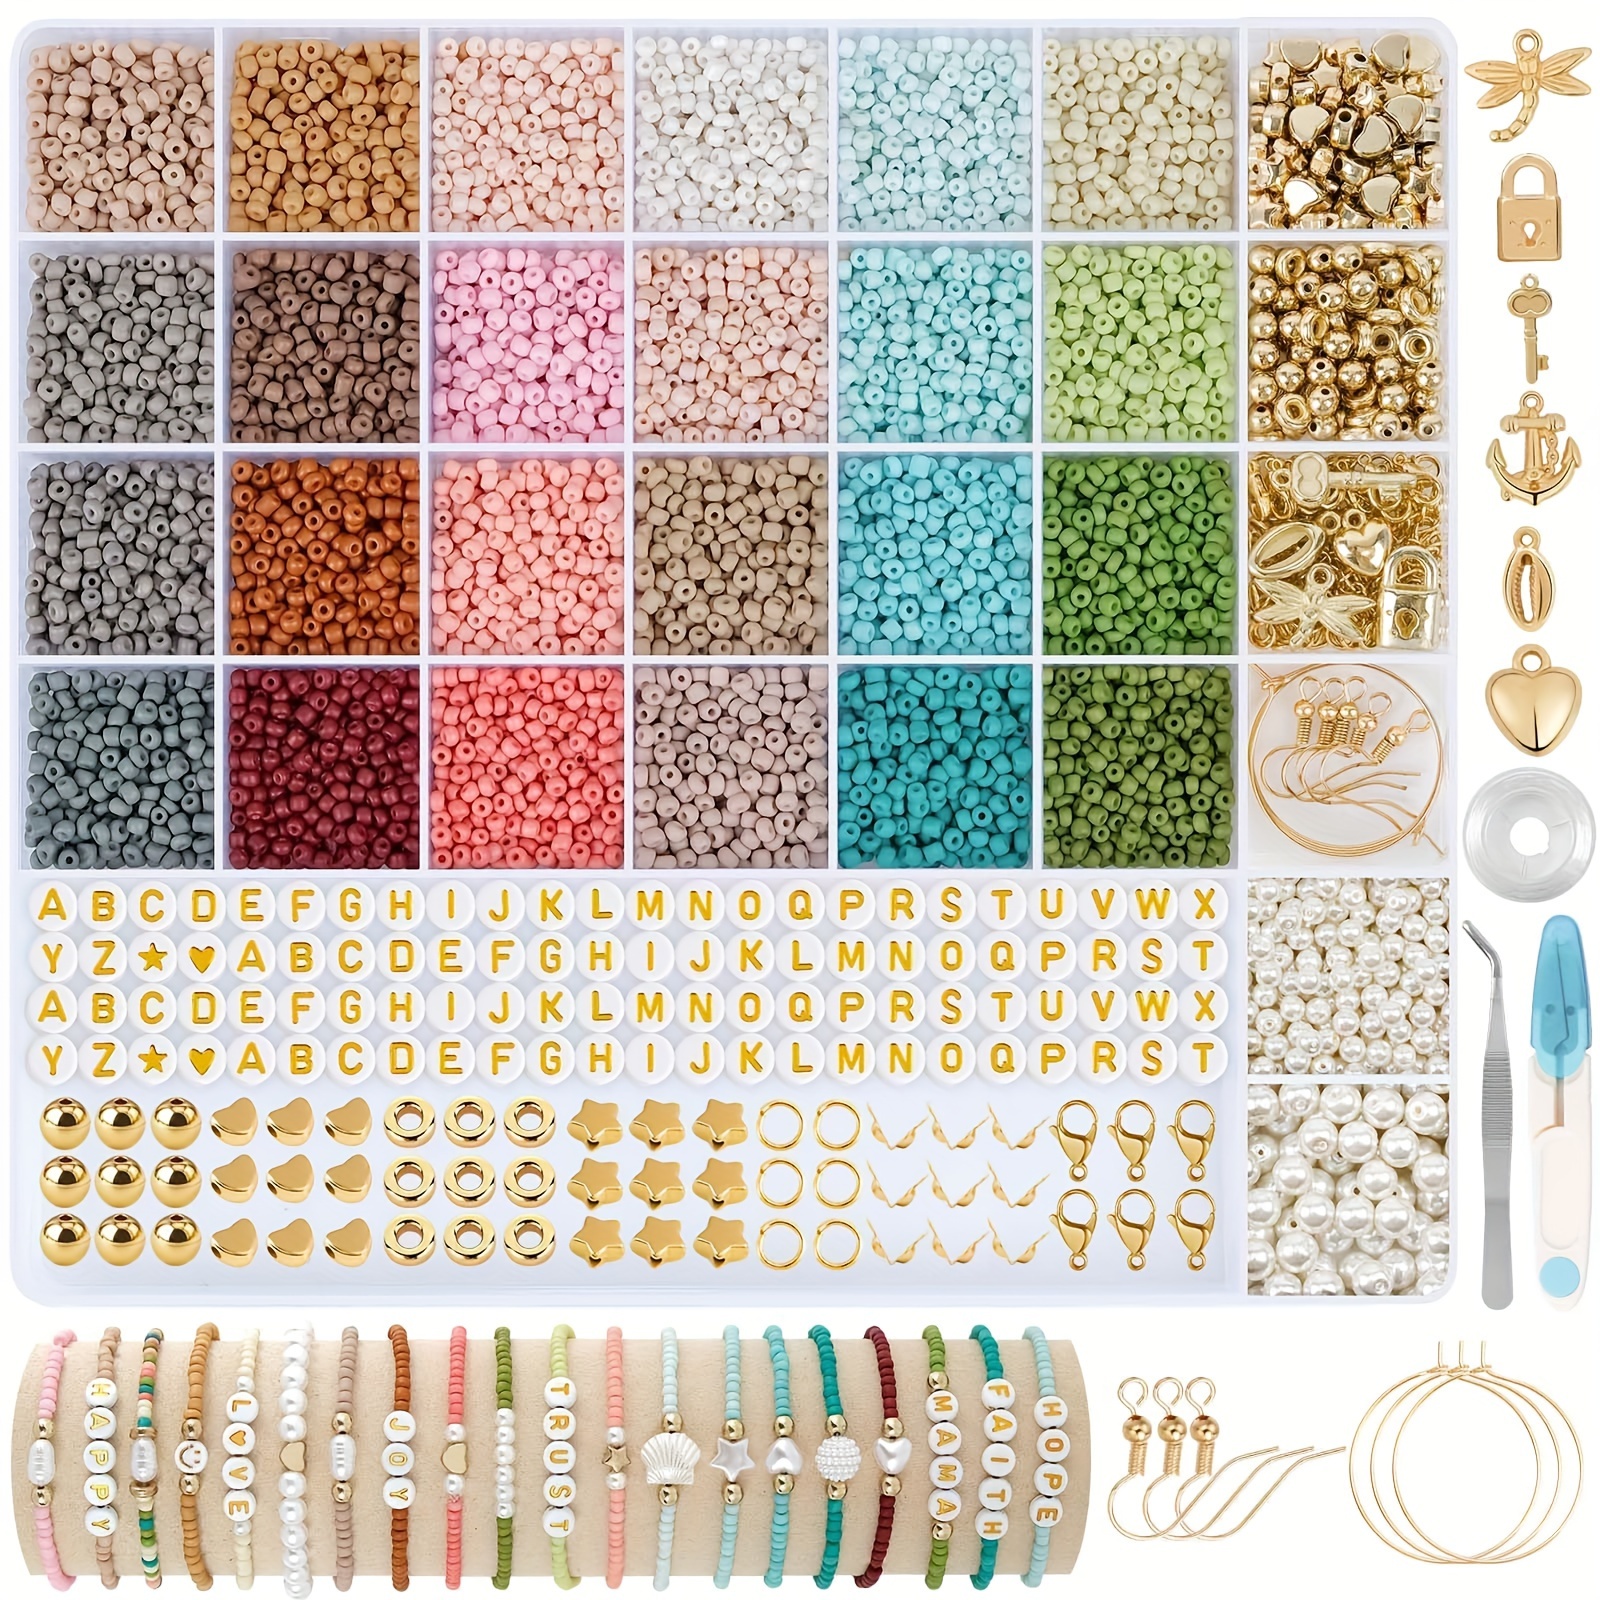 

12000+ Colorful 3mm Glass Beads Bracelet Set Ideal Gift Beads Kit Jewelry Making Diy Bracelet Necklace Birthday Holidays Special Fashion Beaded Accessories